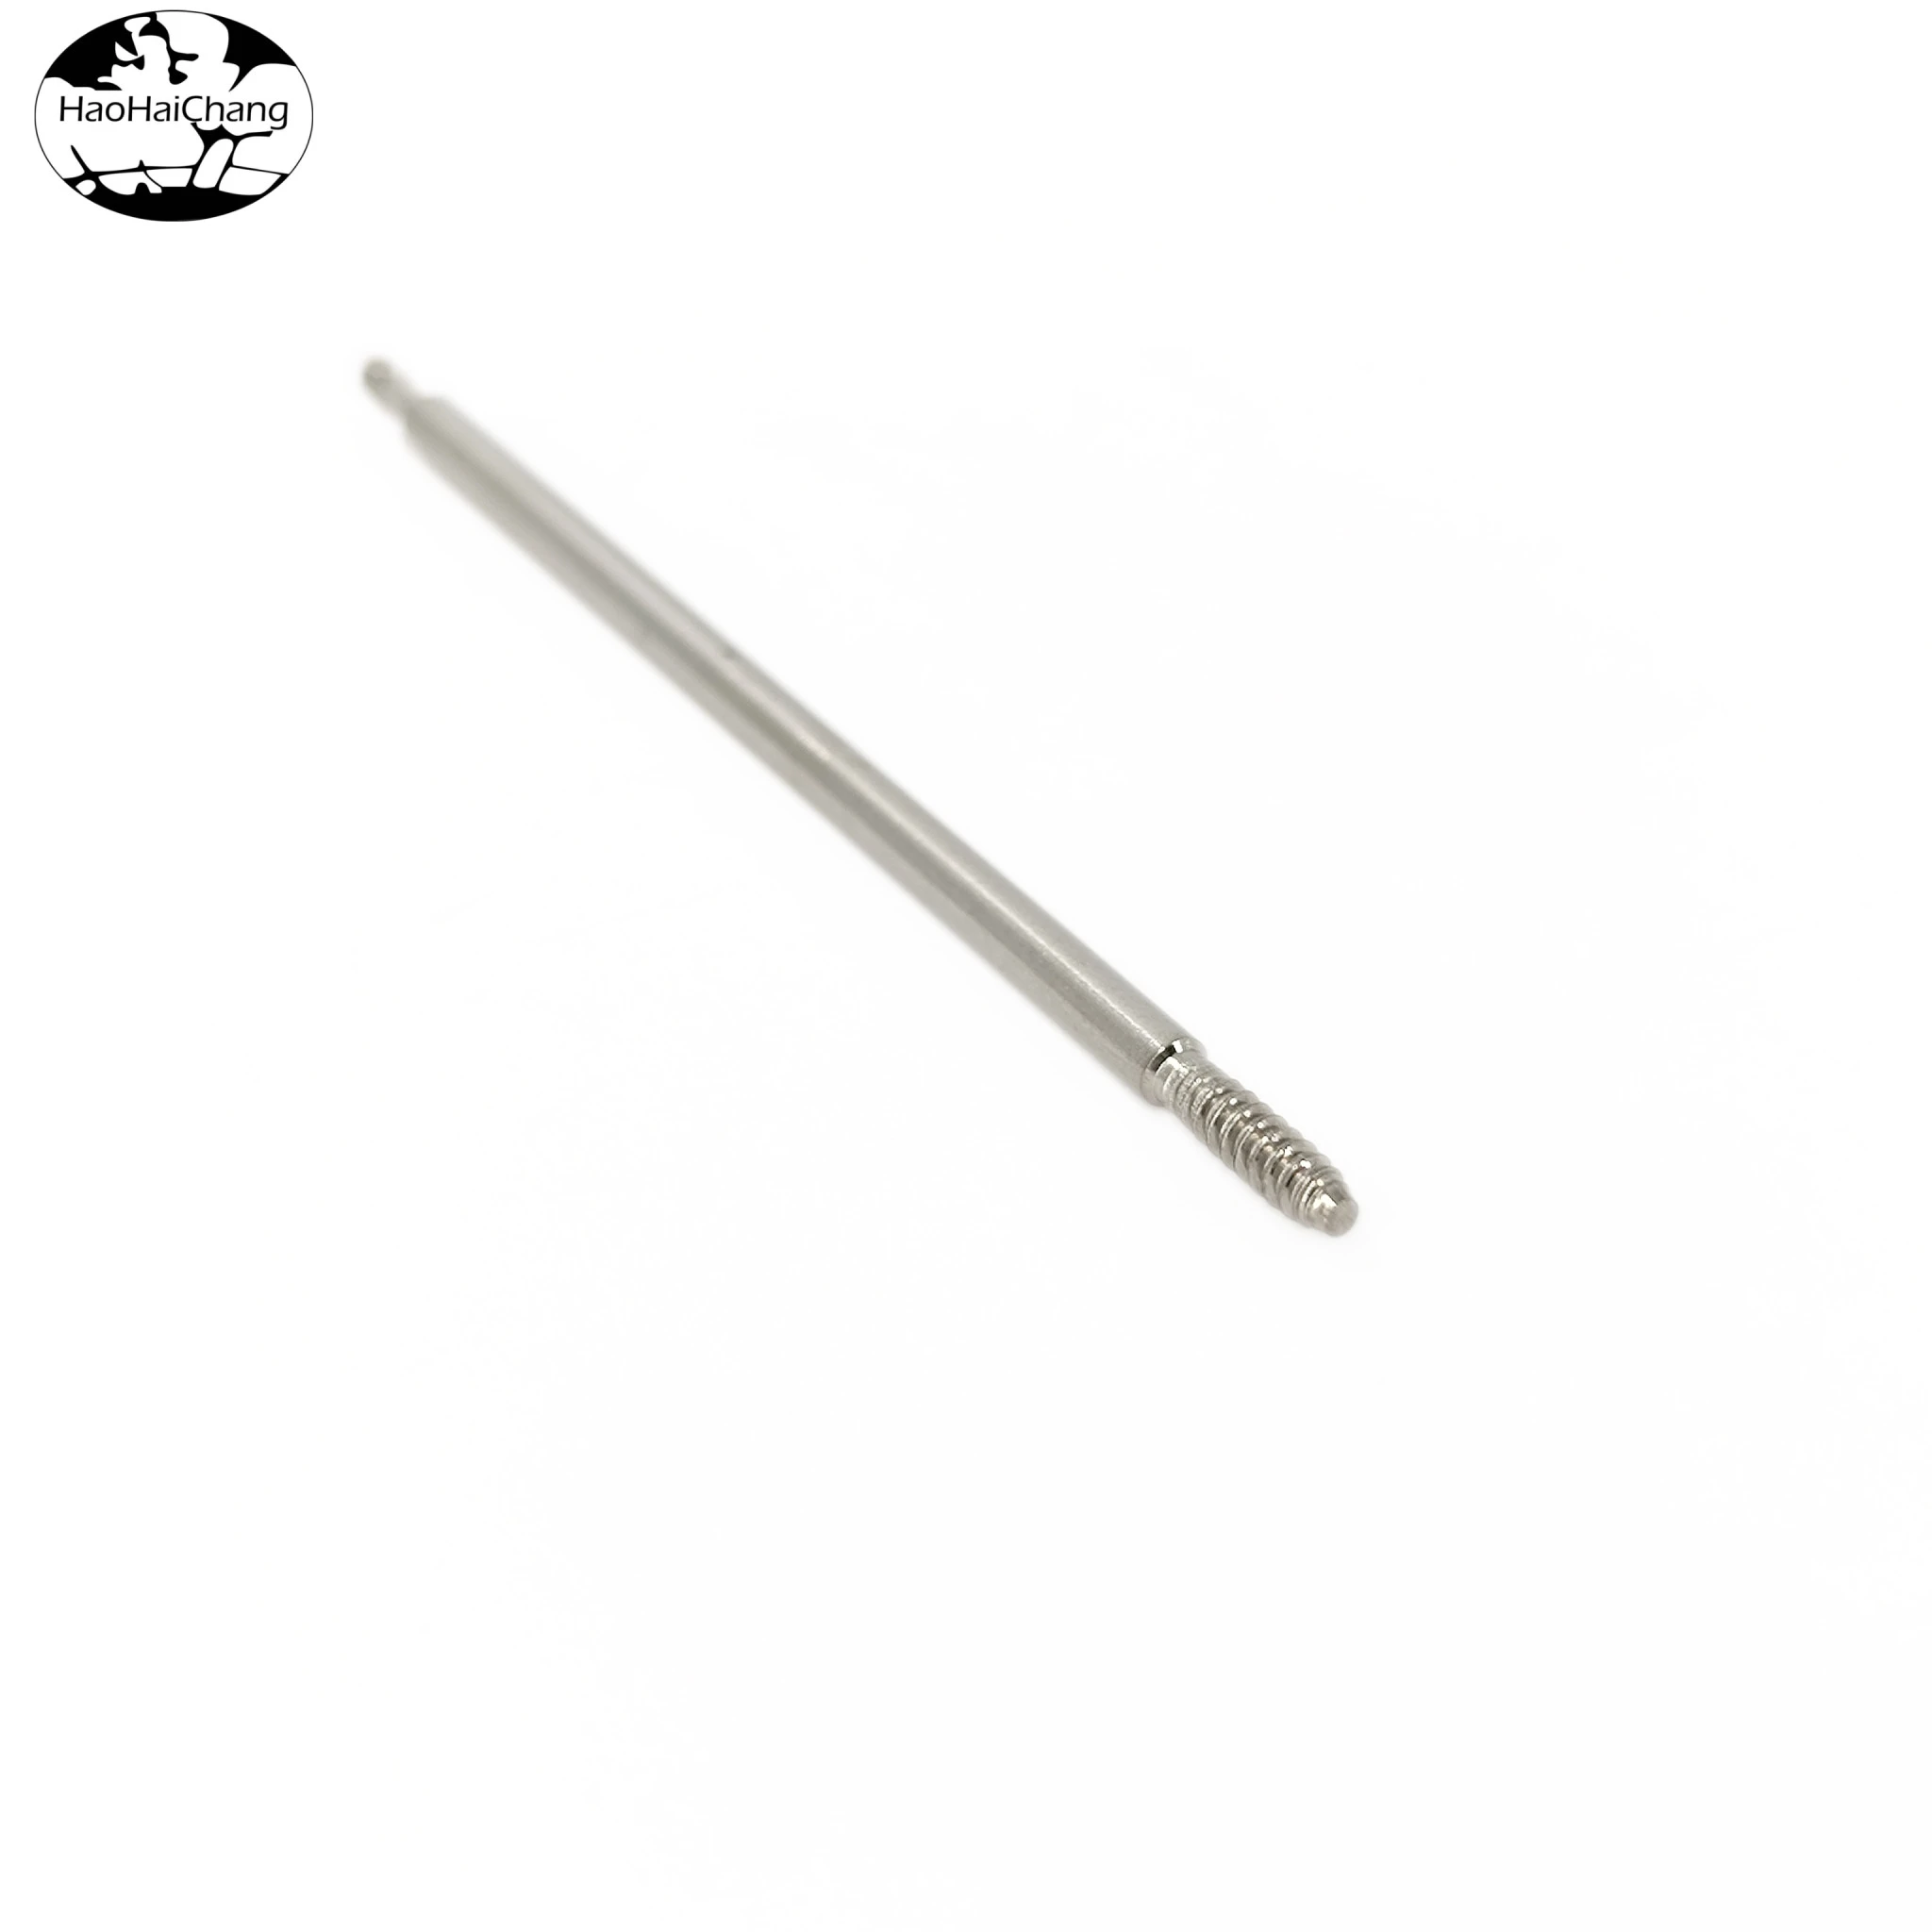 HHC-482 Stainless Steel High Temperature Heating Rod Upper Lead Rod